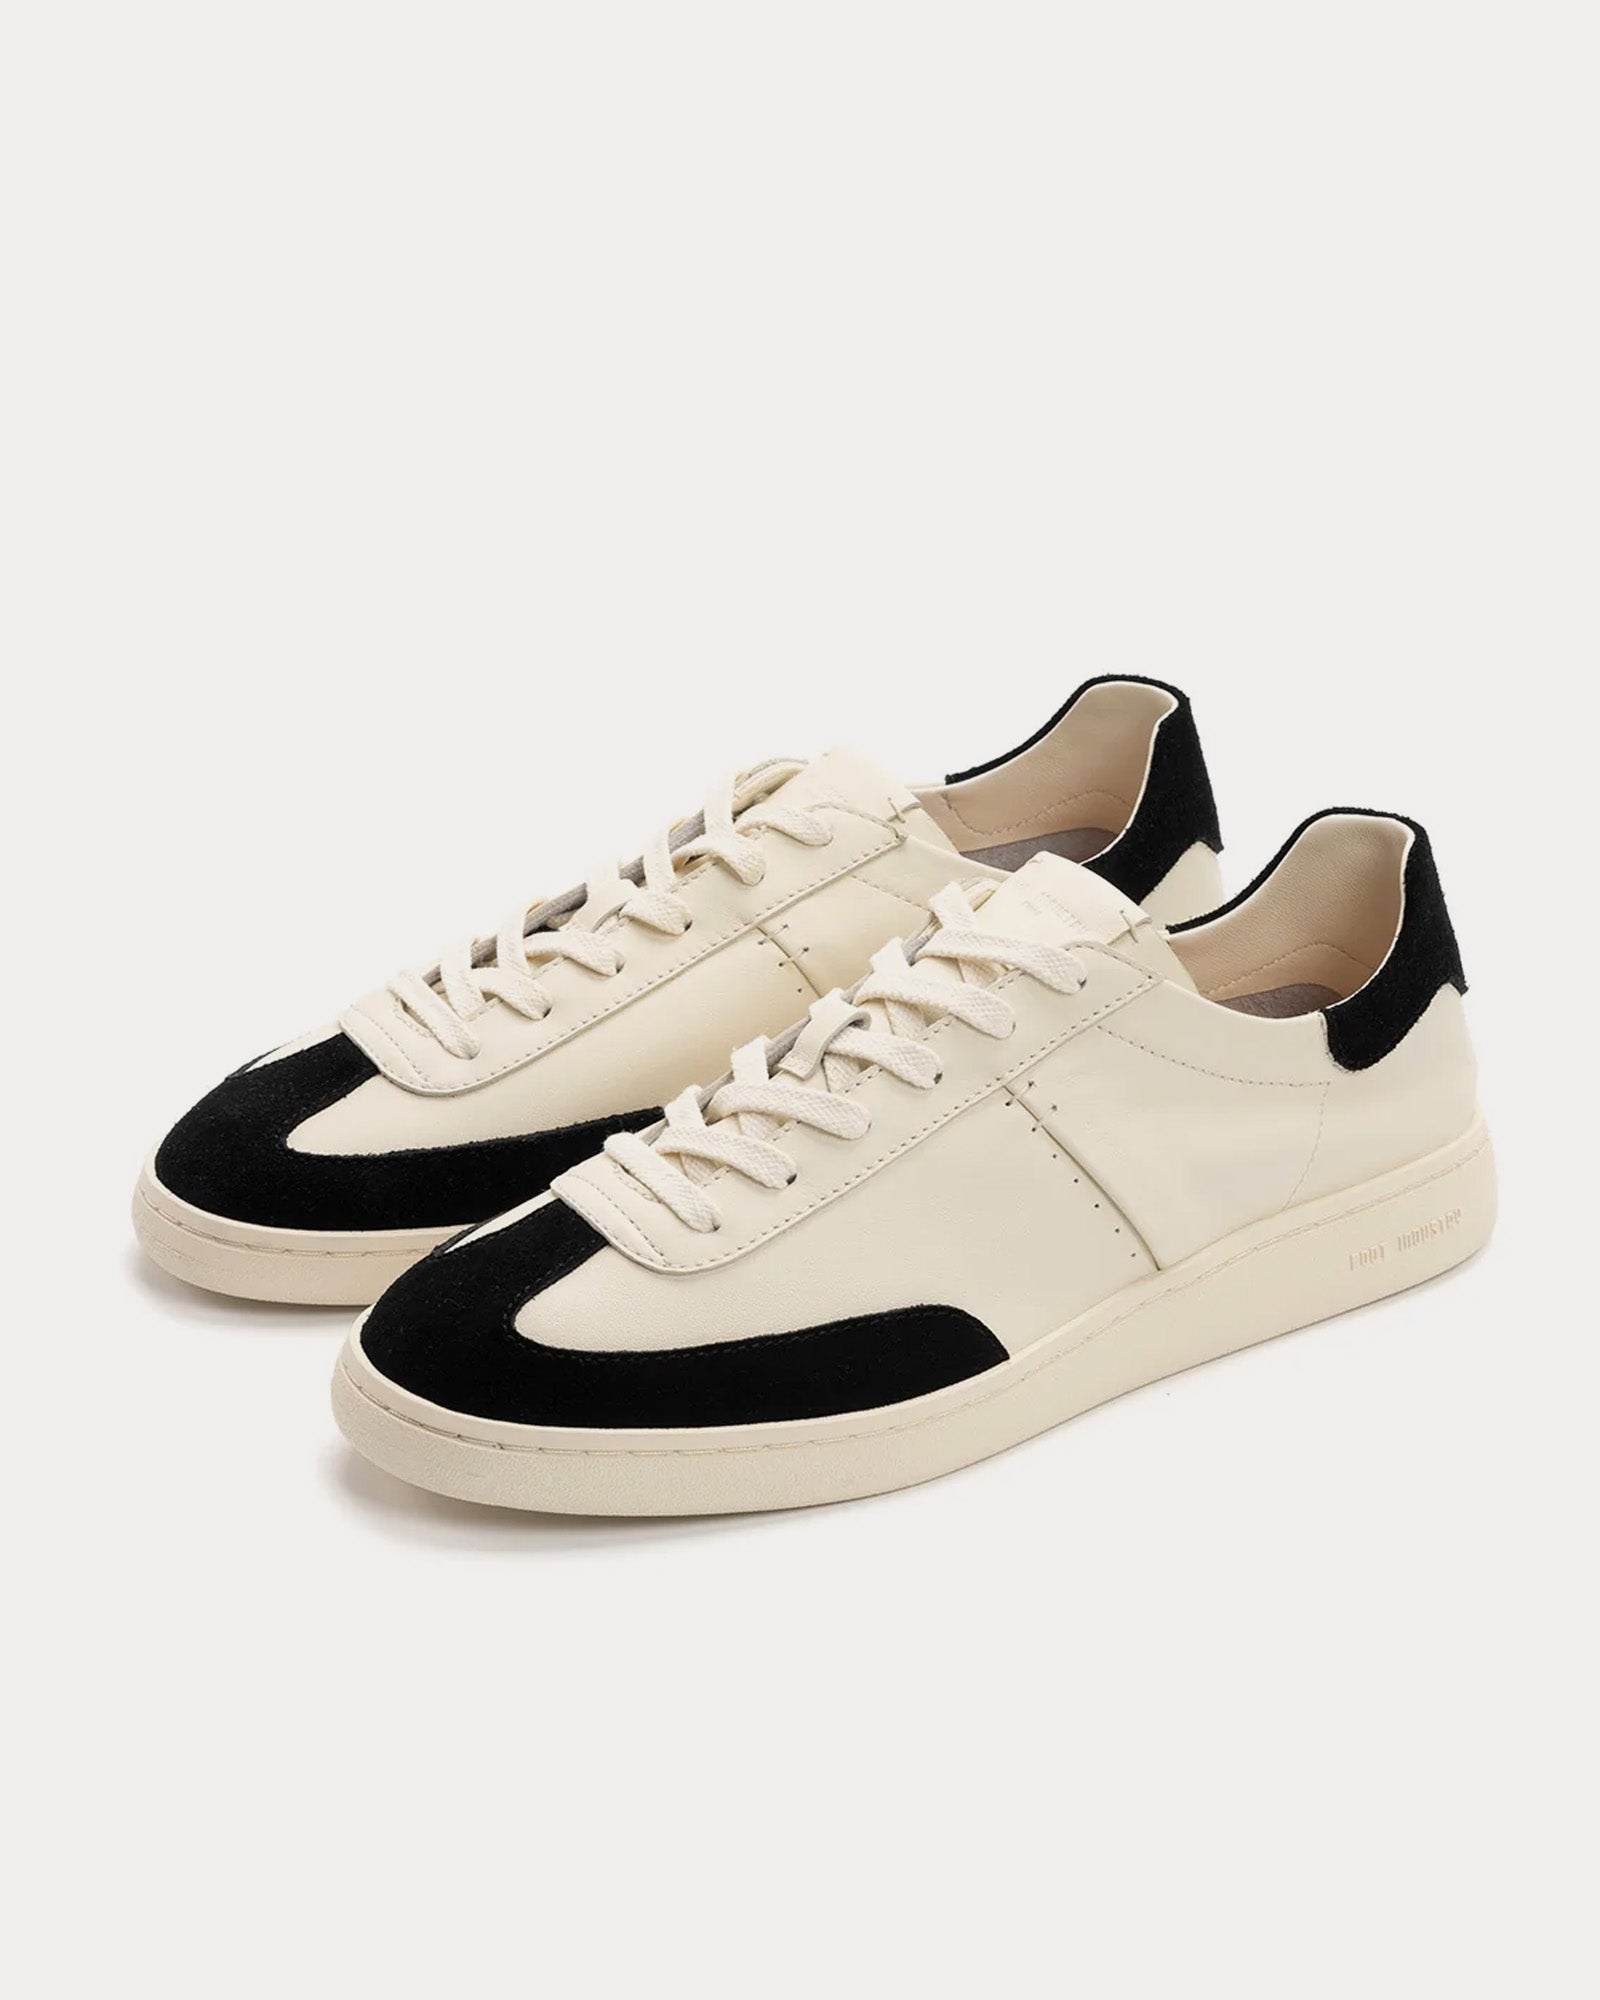 Foot Industry - GAT OP Leather White / Anthracite Low Top Sneakers